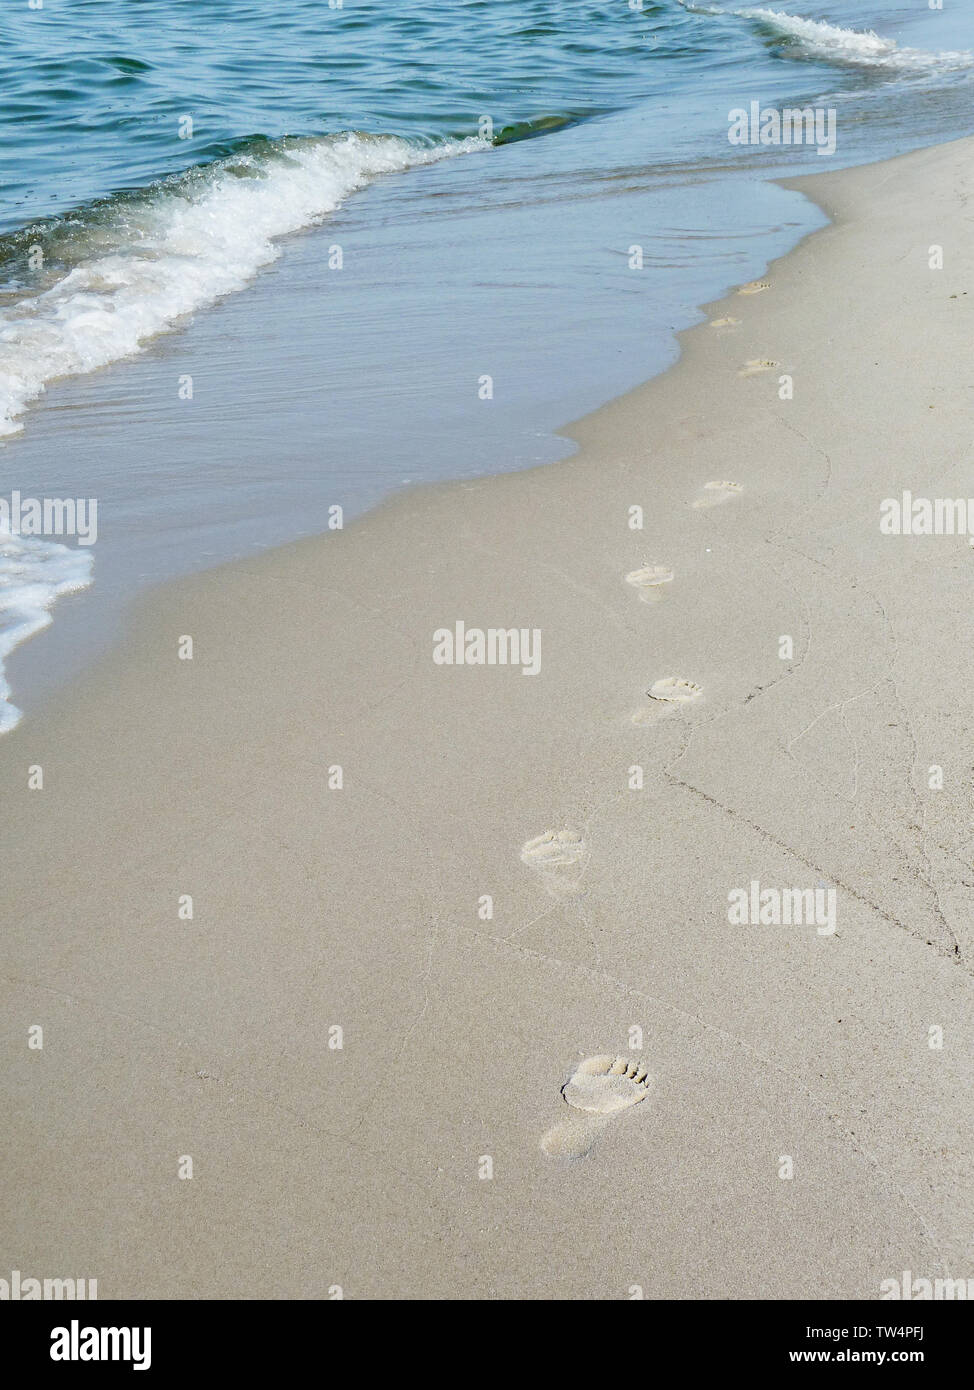 Footprints in sand at the beach vanishing in sea waves Stock Photo